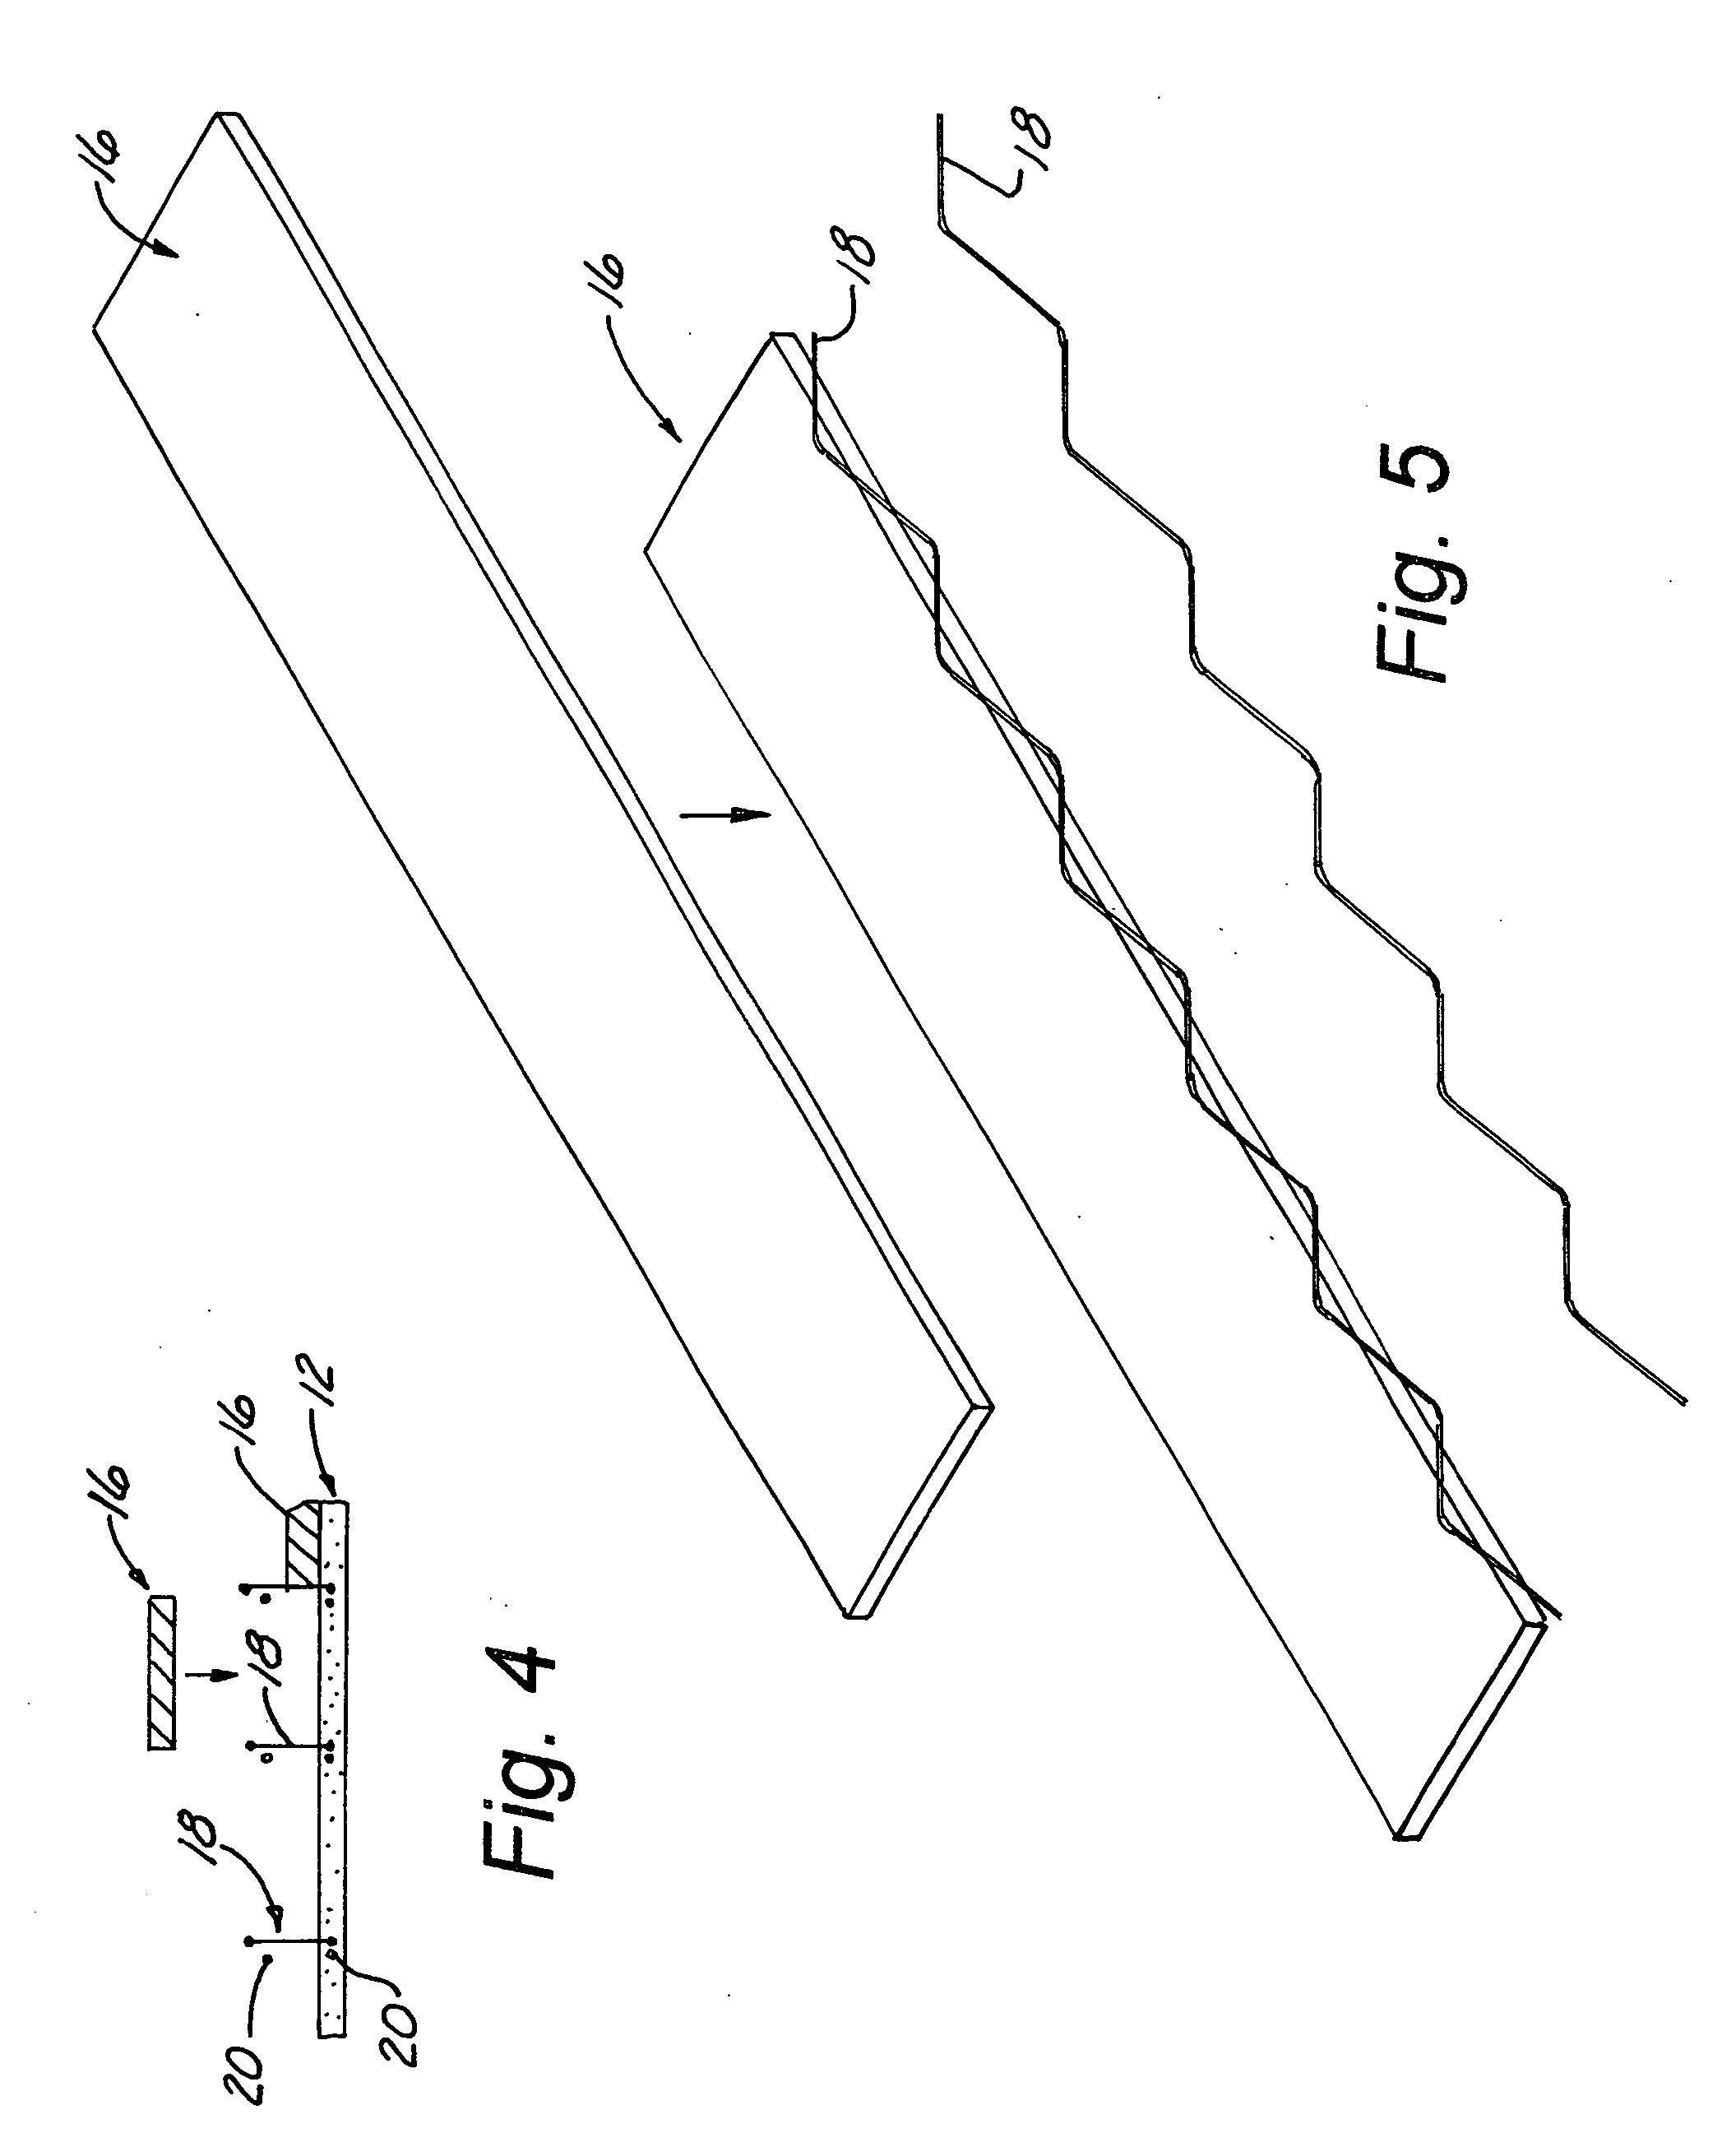 Sinuous composite connector system